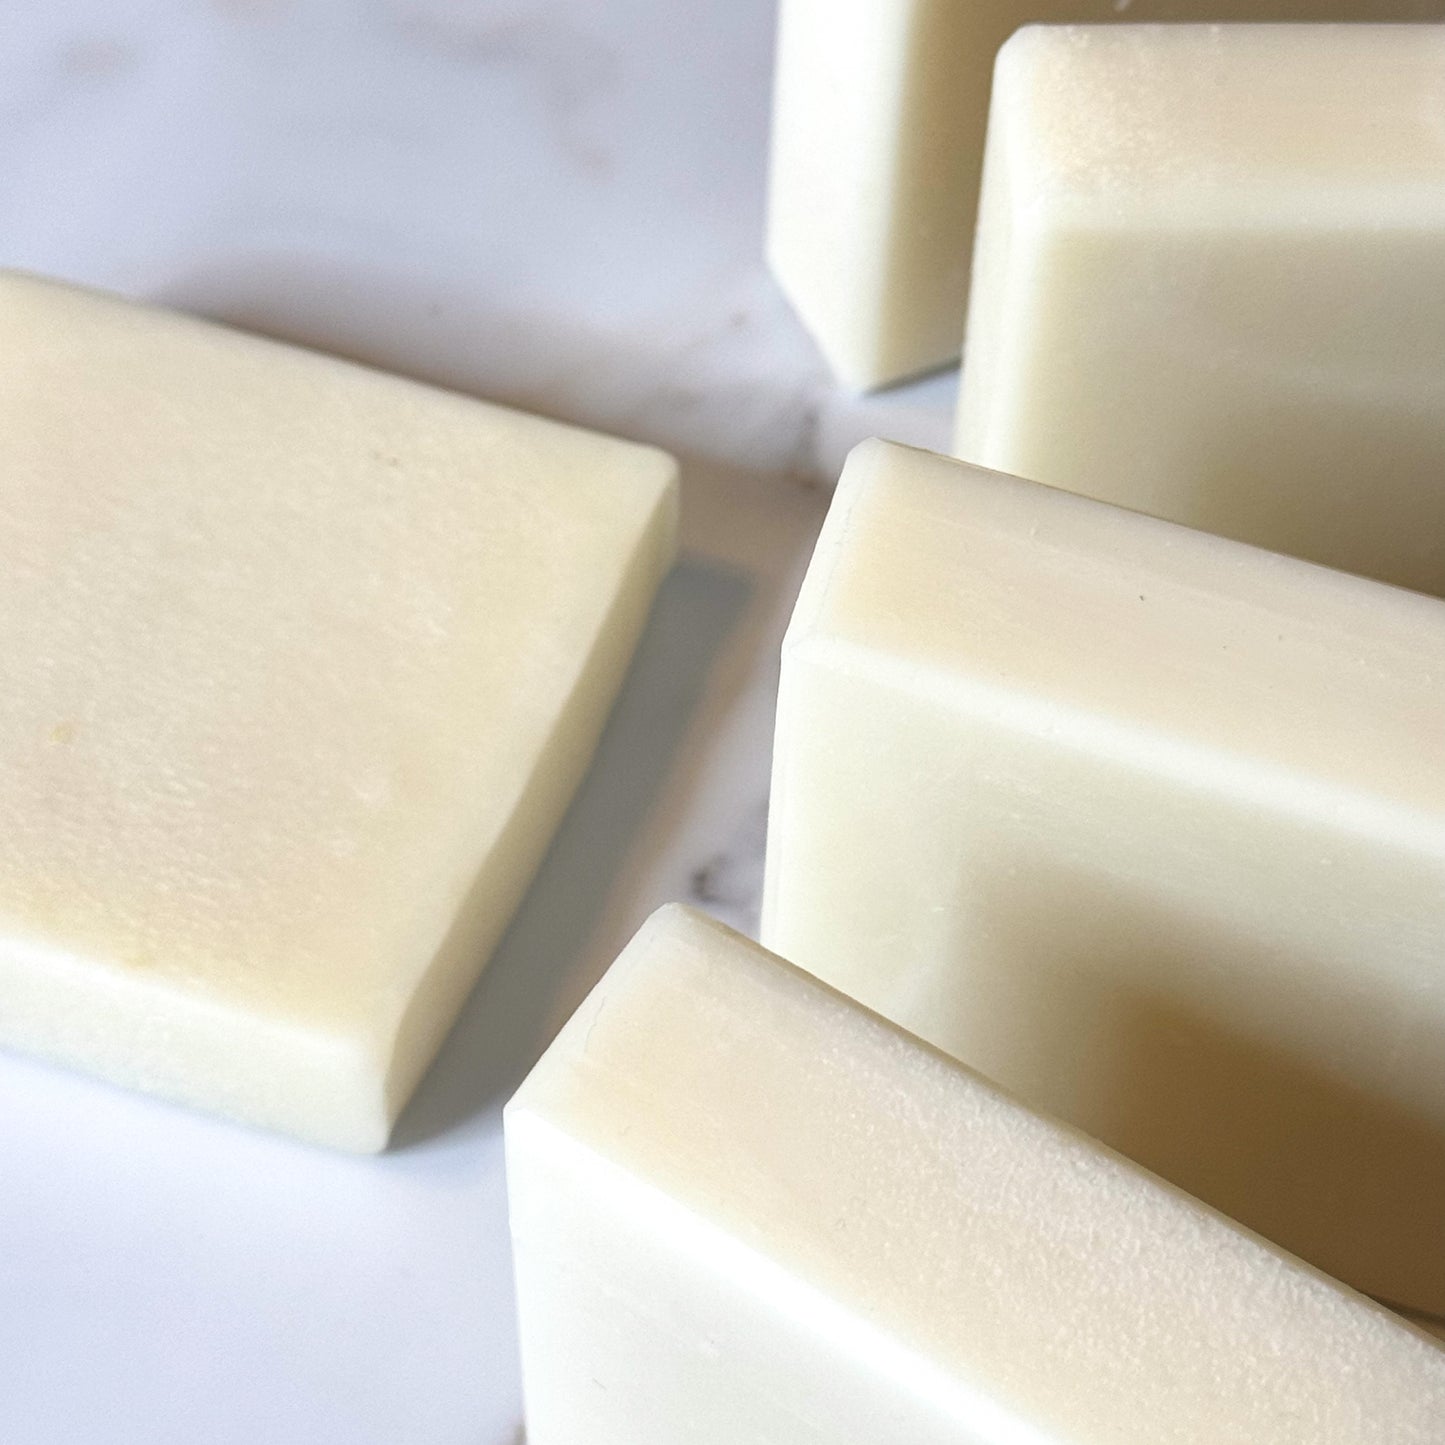 flat white | unscented tallow soap